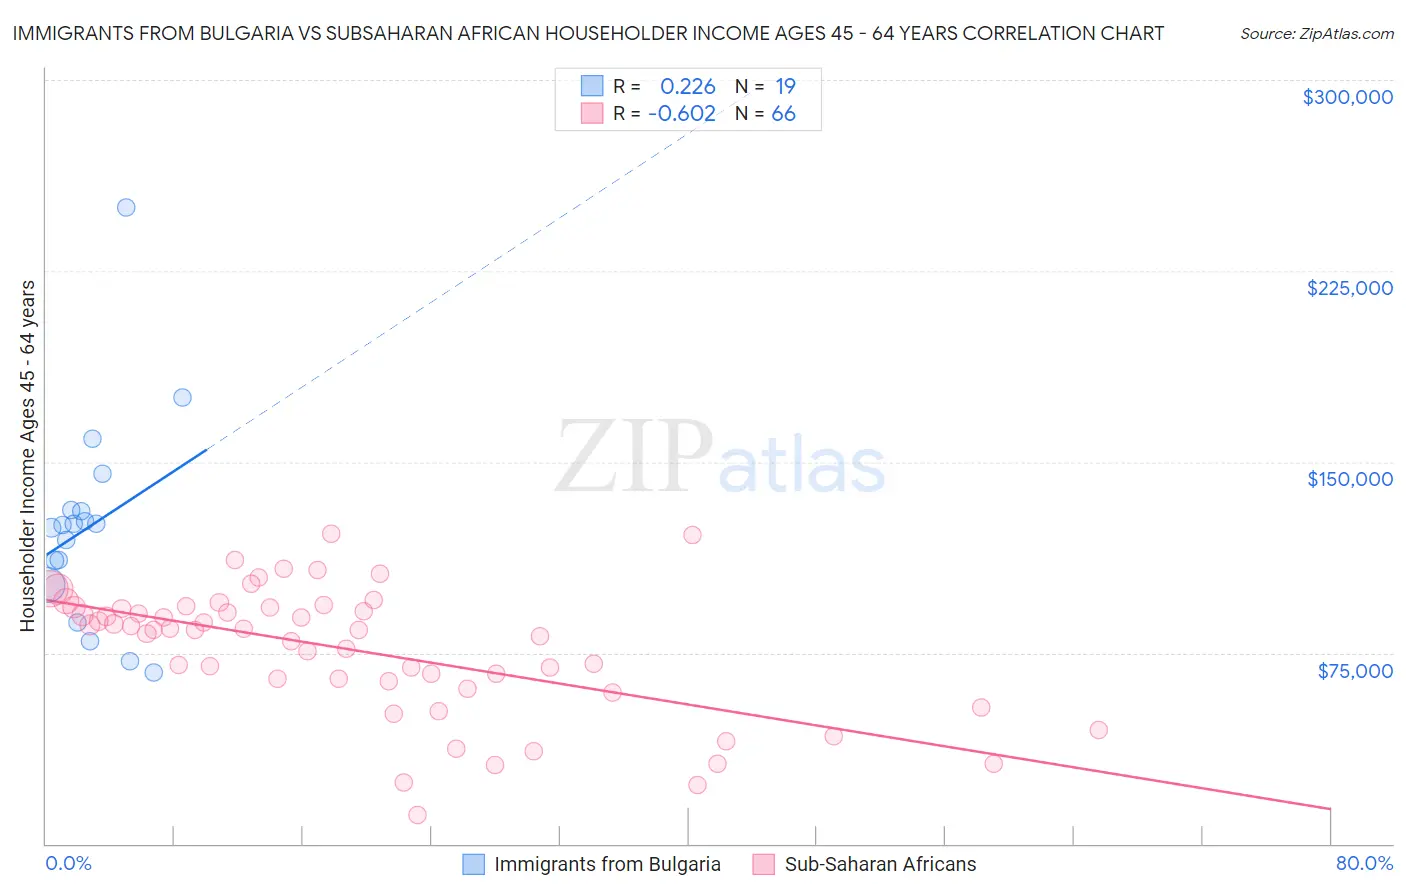 Immigrants from Bulgaria vs Subsaharan African Householder Income Ages 45 - 64 years